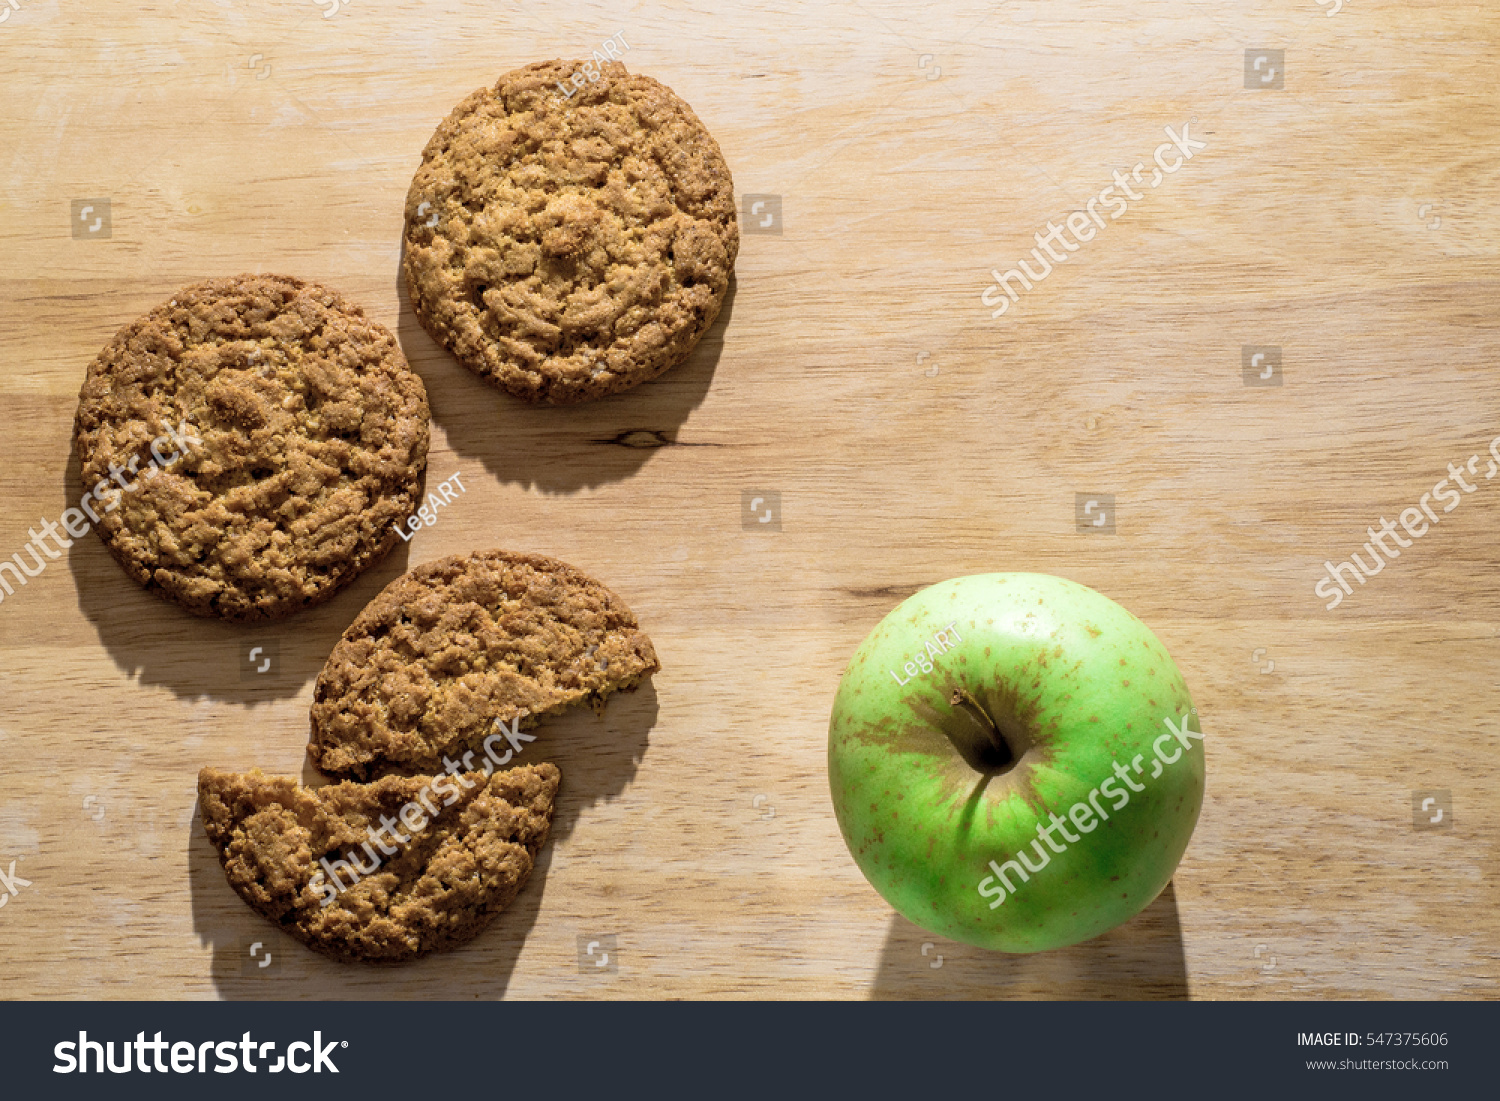 Oatmeal cookies on a wooden board with green apple. Flat lay #547375606